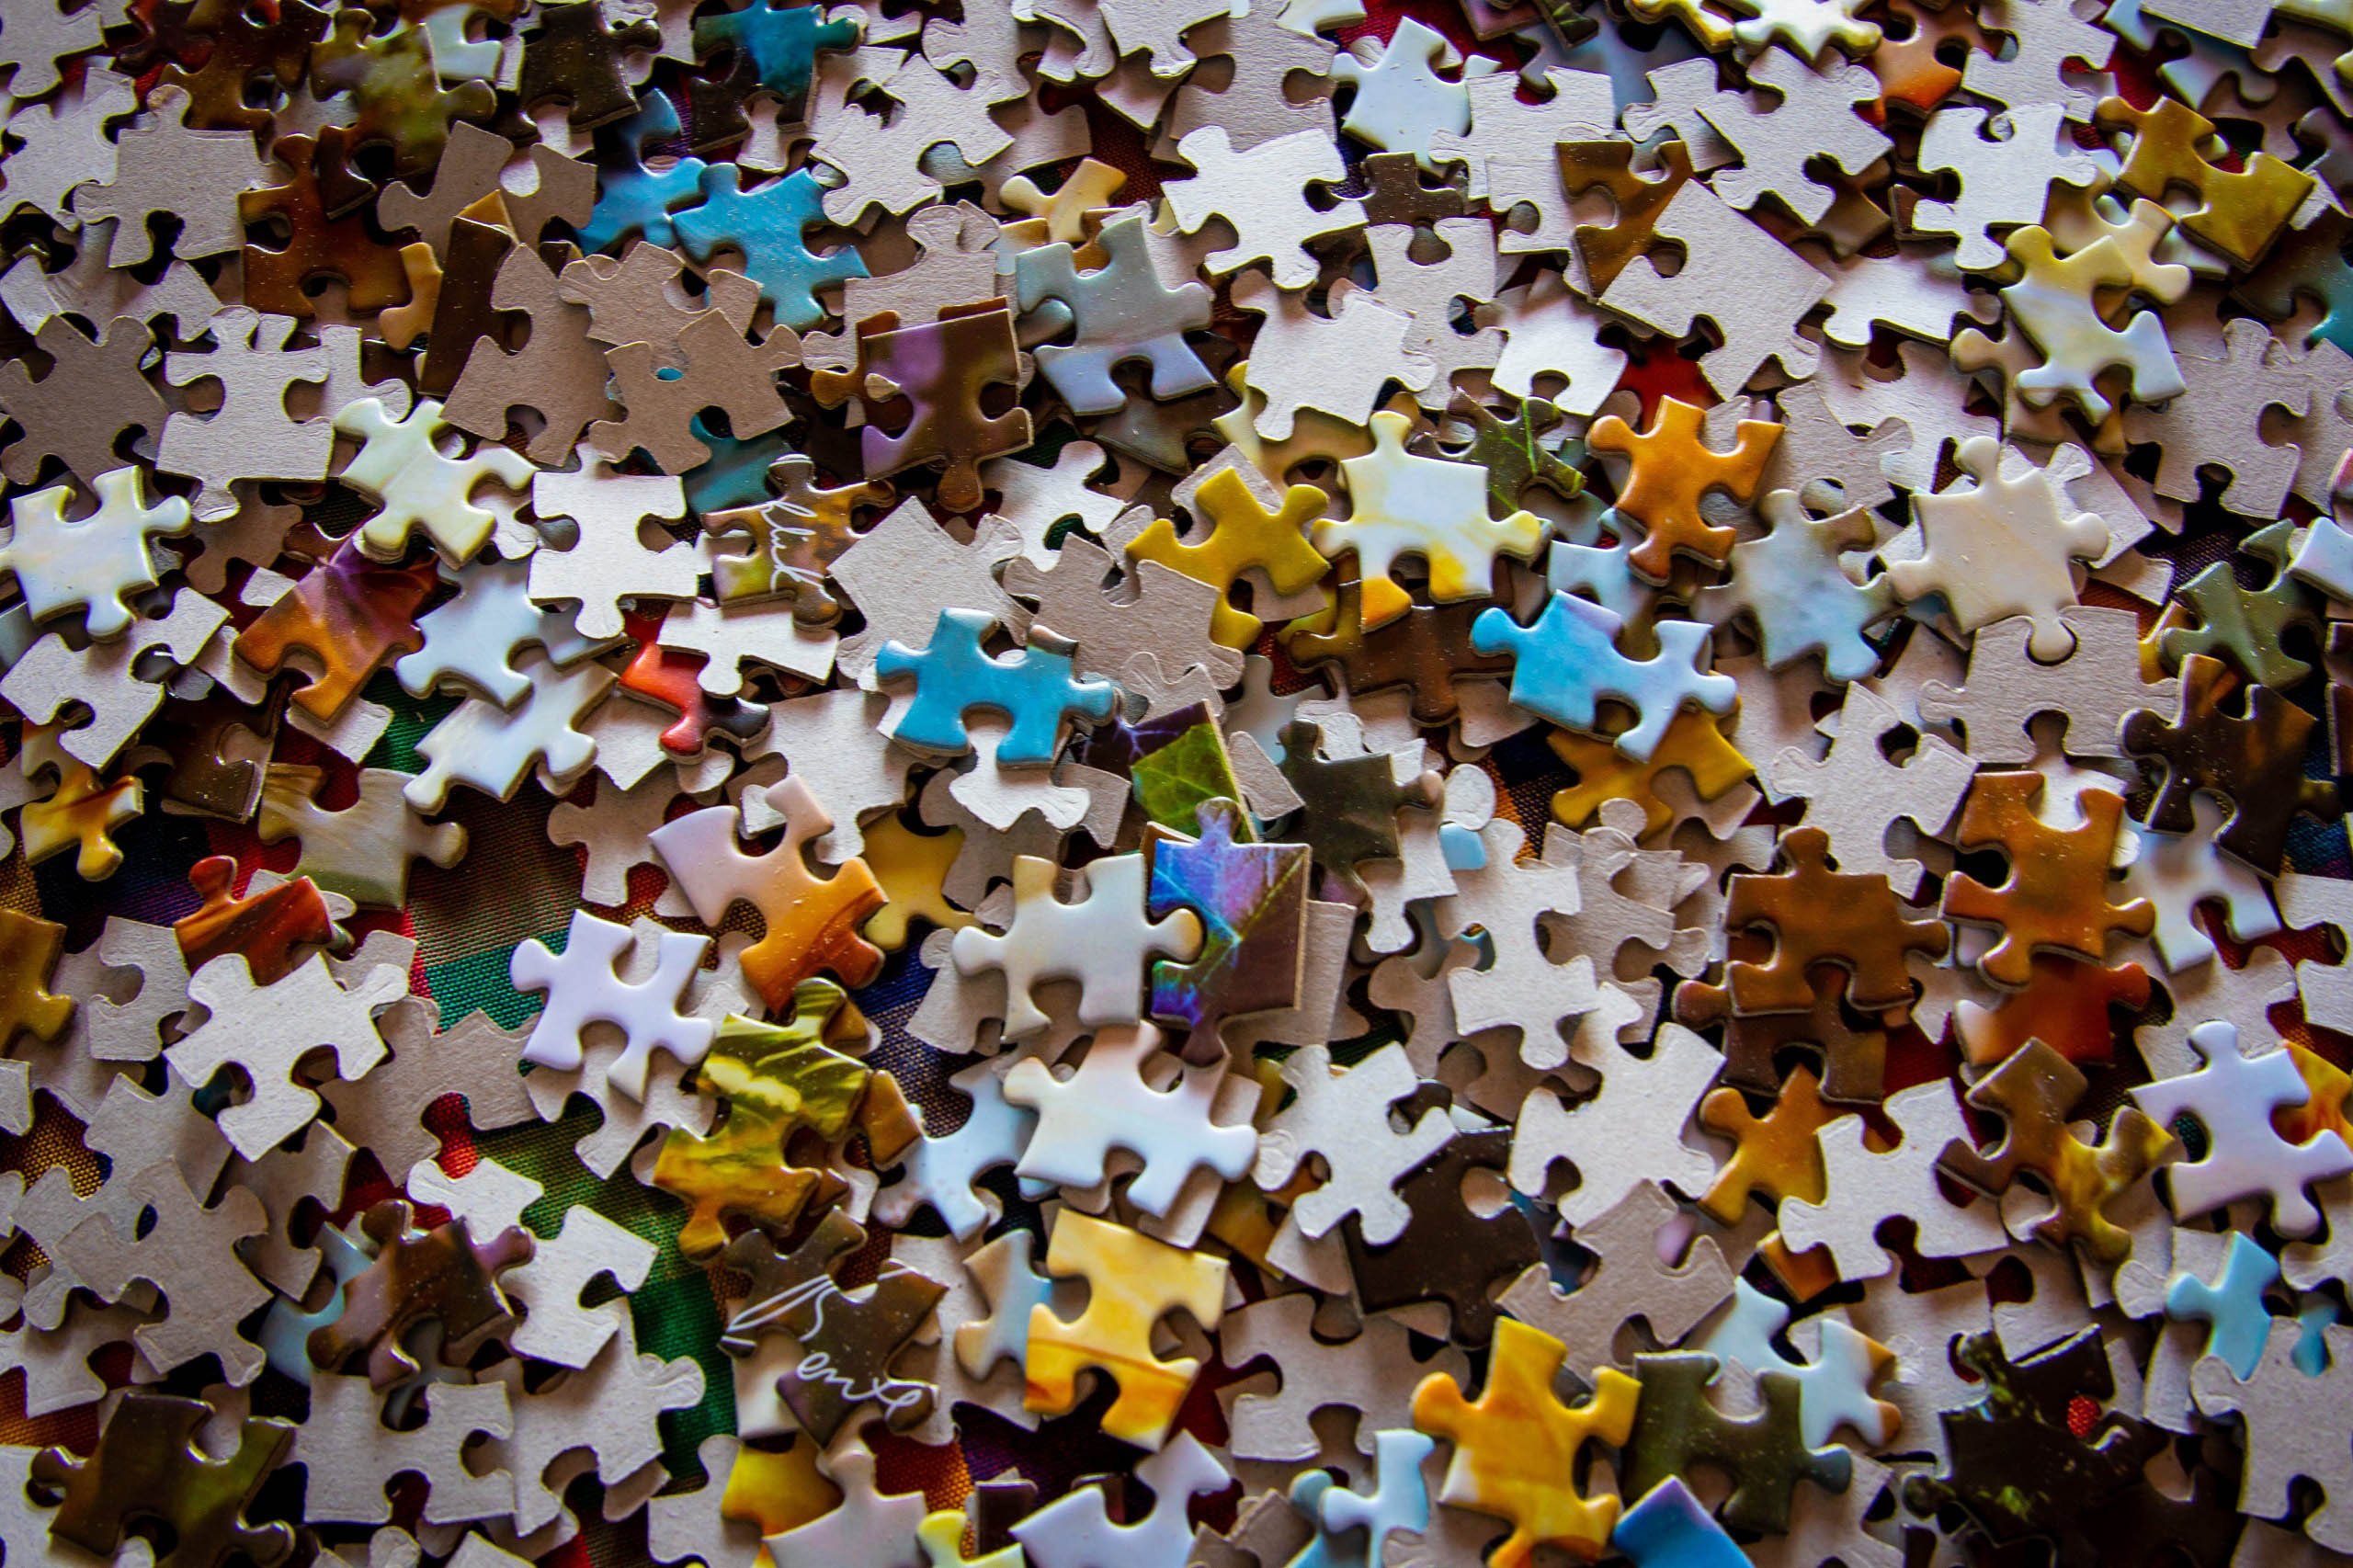 Do you love puzzles? Drop into Menai Library on the 3rd Thursday of the month and trade your pre-loved puzzles for some new favourites with other puzzle enthusiasts.